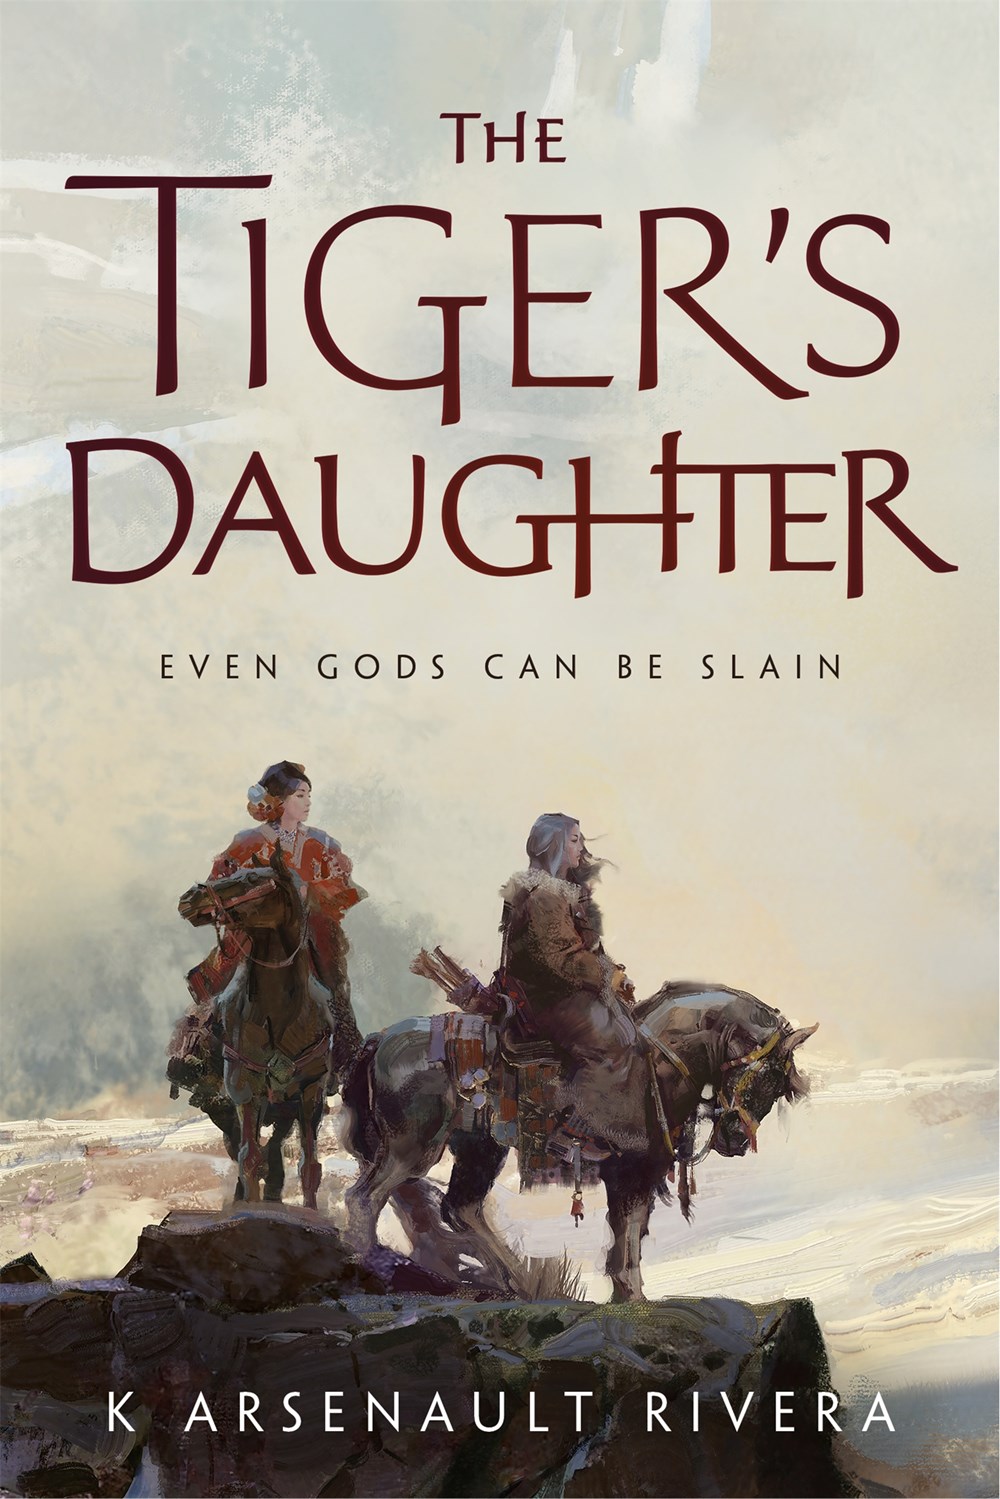 The Tiger’s Daughter